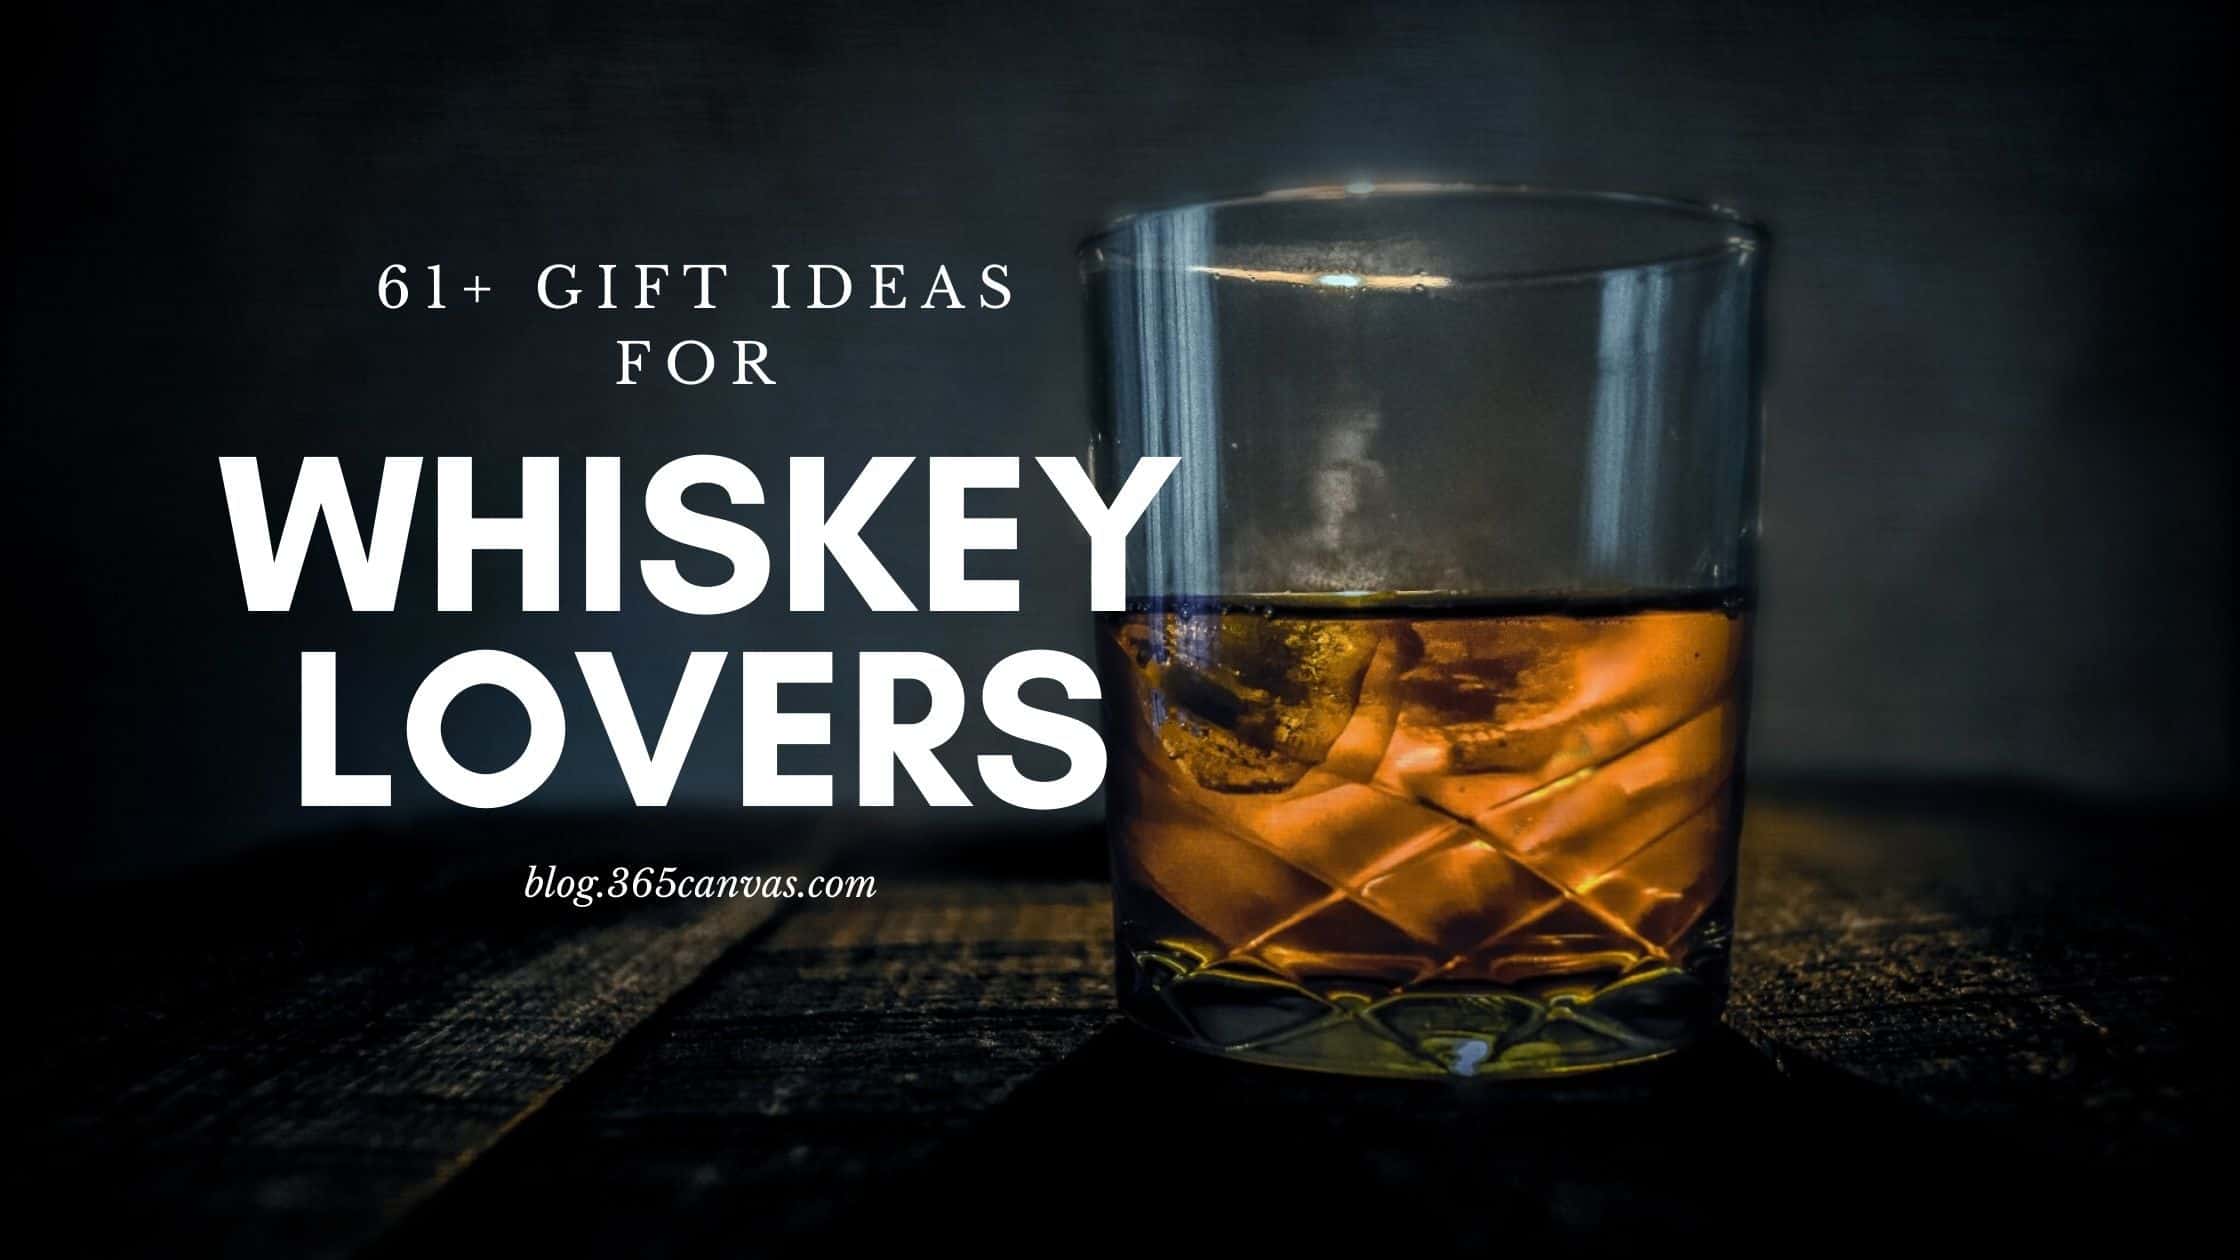 61 Gifts for Whiskey Lovers: An Ultimate Guide for Every Taste & Budget